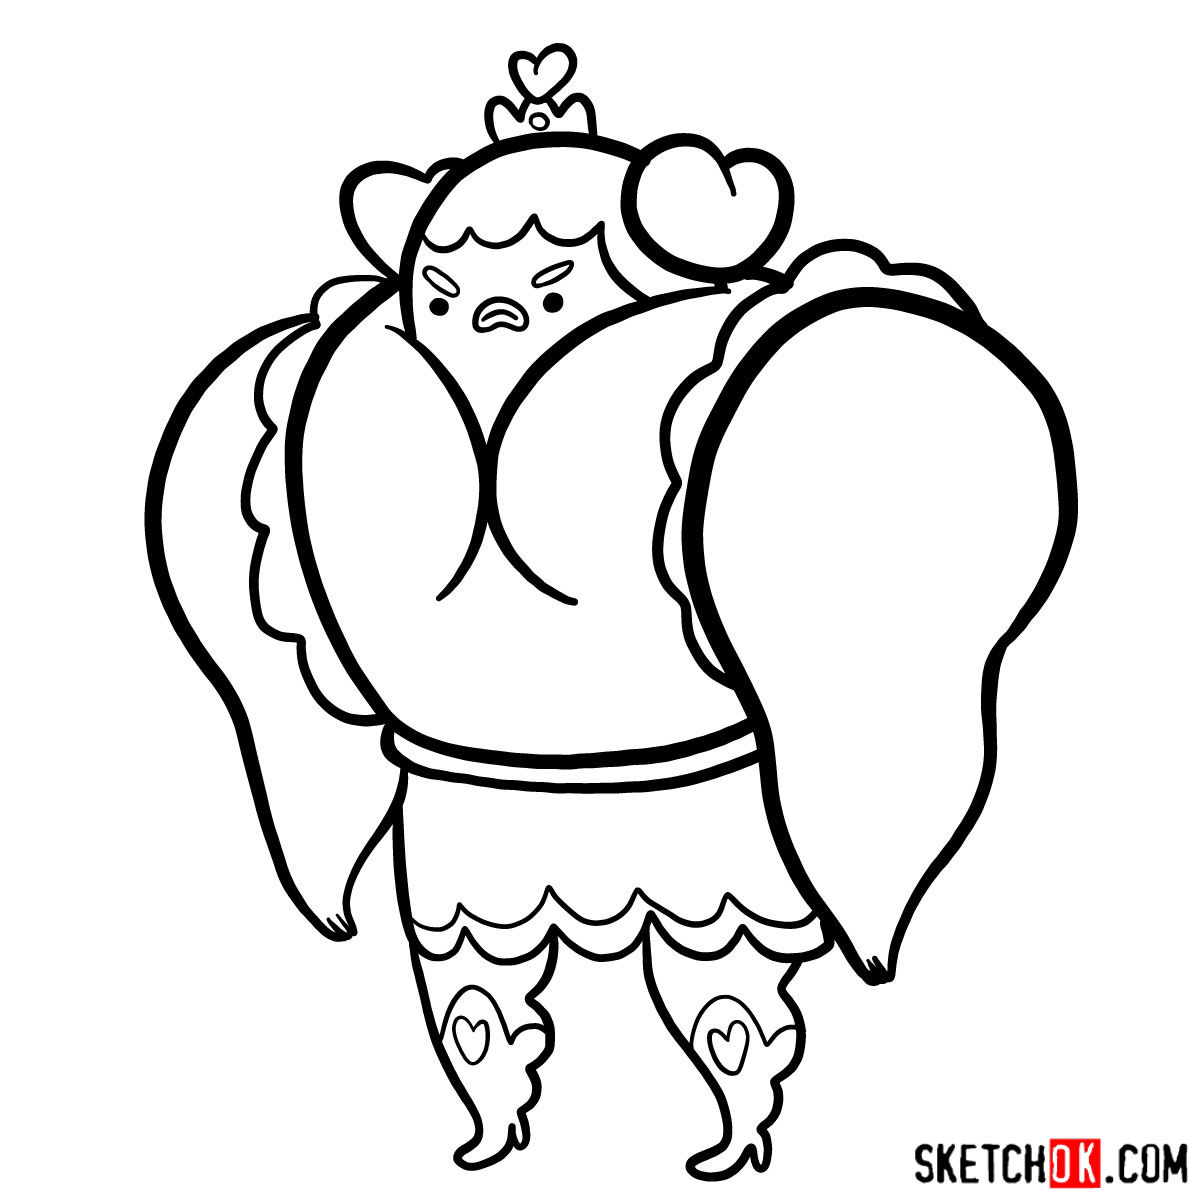 How to draw Muscle Princess from Adventure Time - step 11